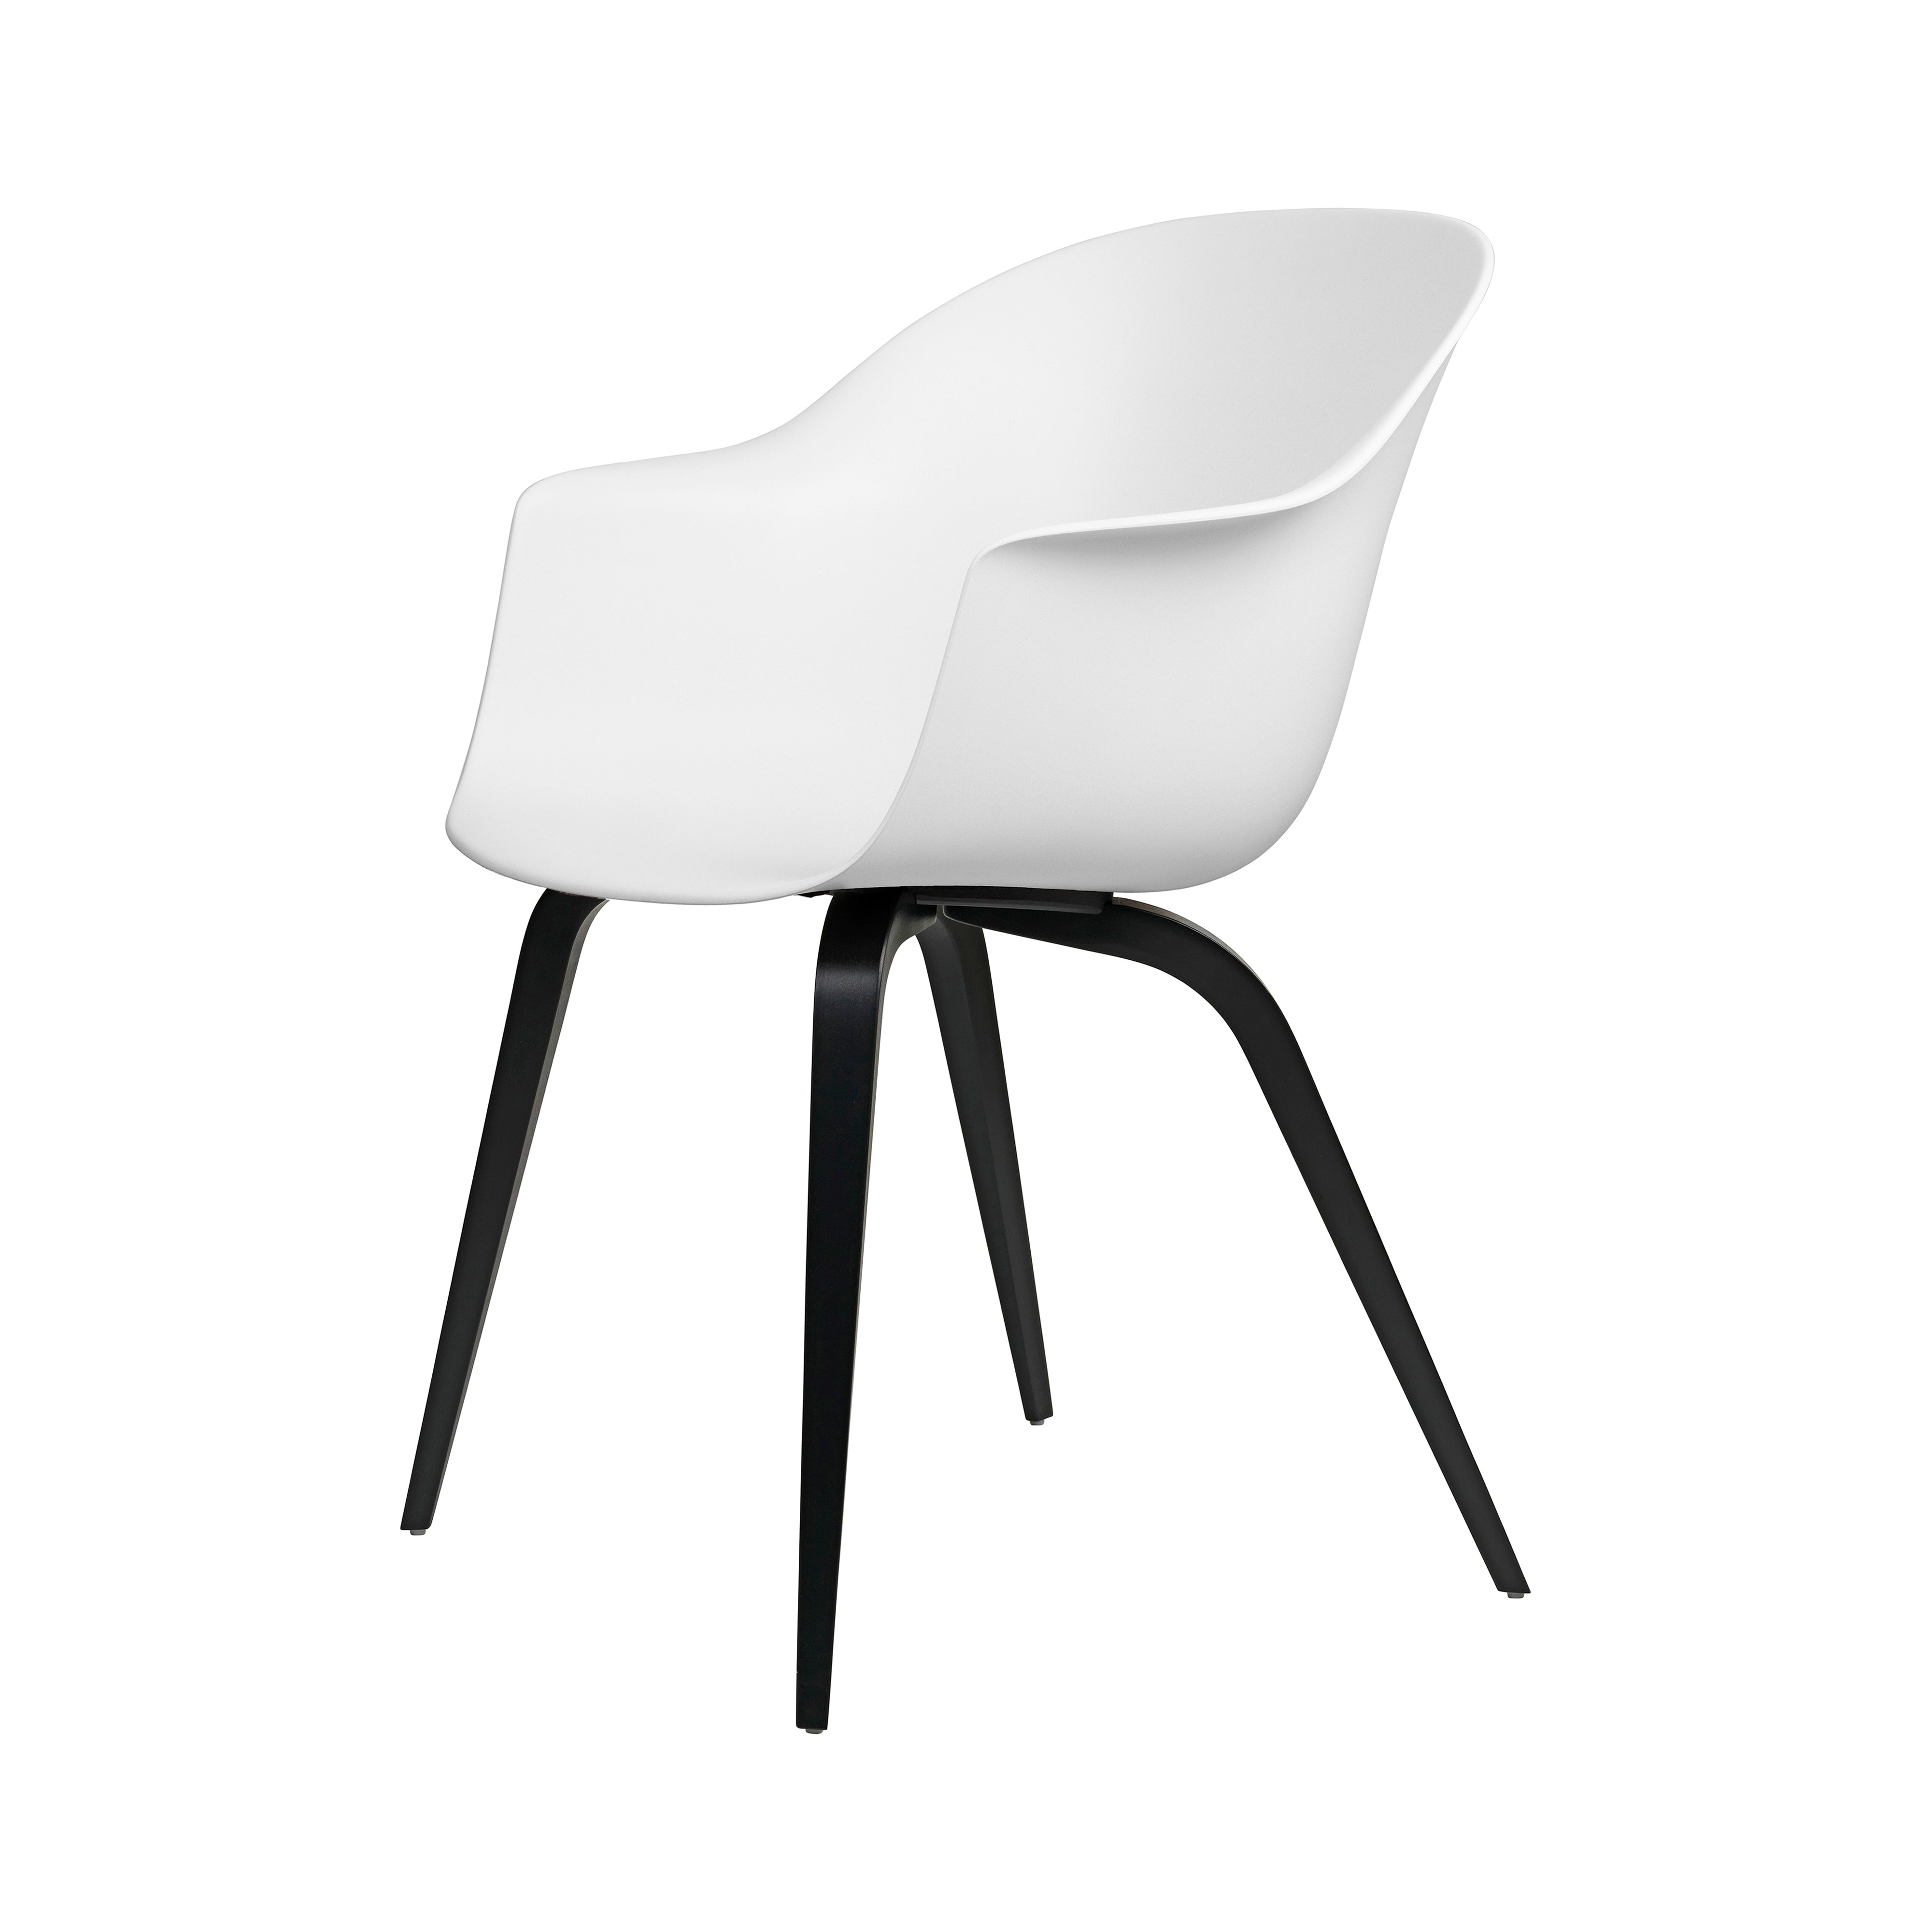 Bat Dining Chair: Wood Base + Black Stained Beech + Alabaster White + Plastic Glides